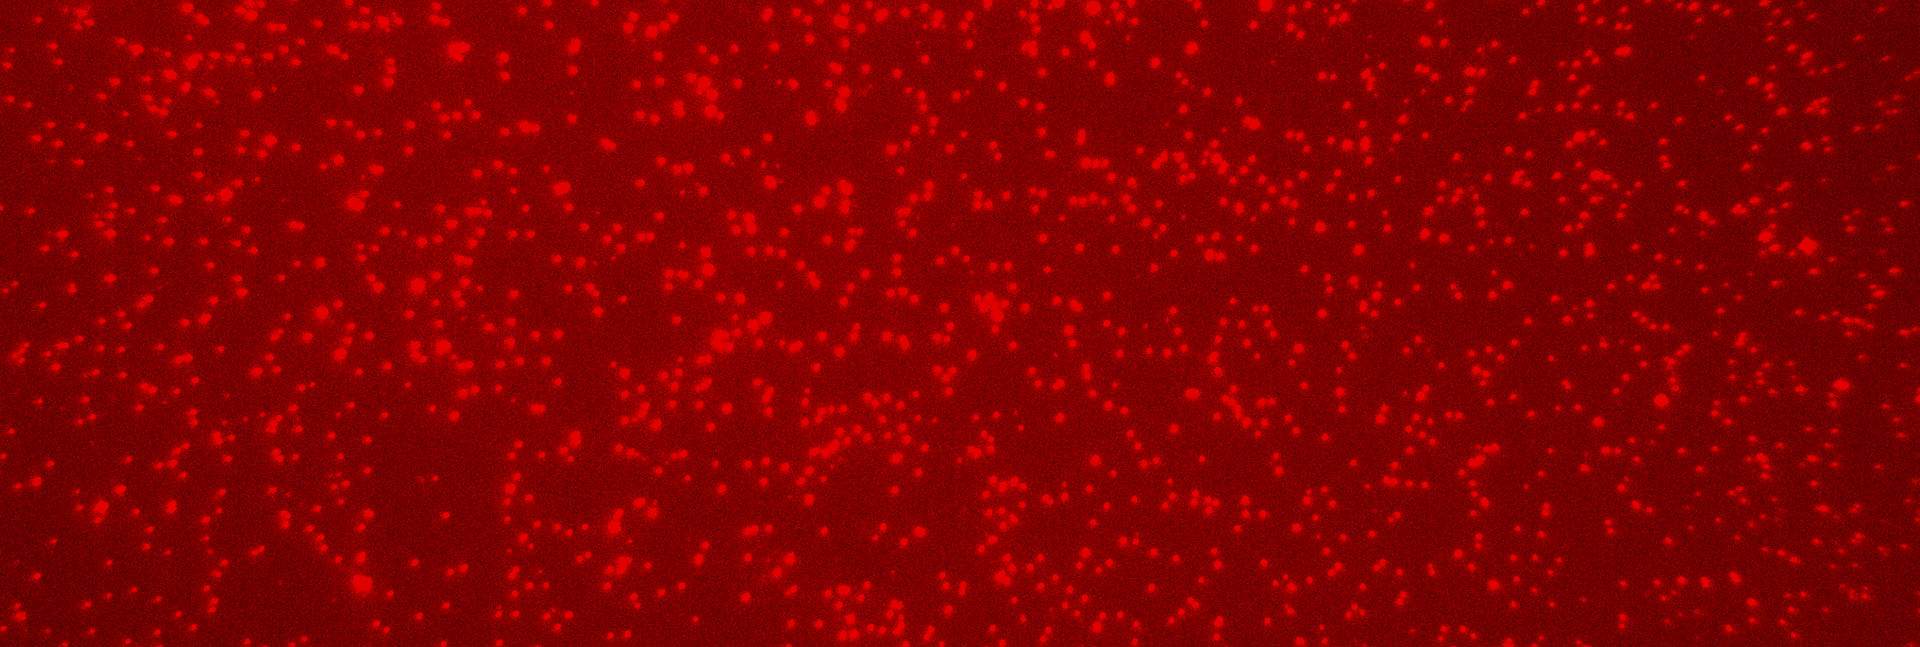 Patterns of epigenetic markers revealed by EPINUC on blood nucleosomes (bright-red dots)